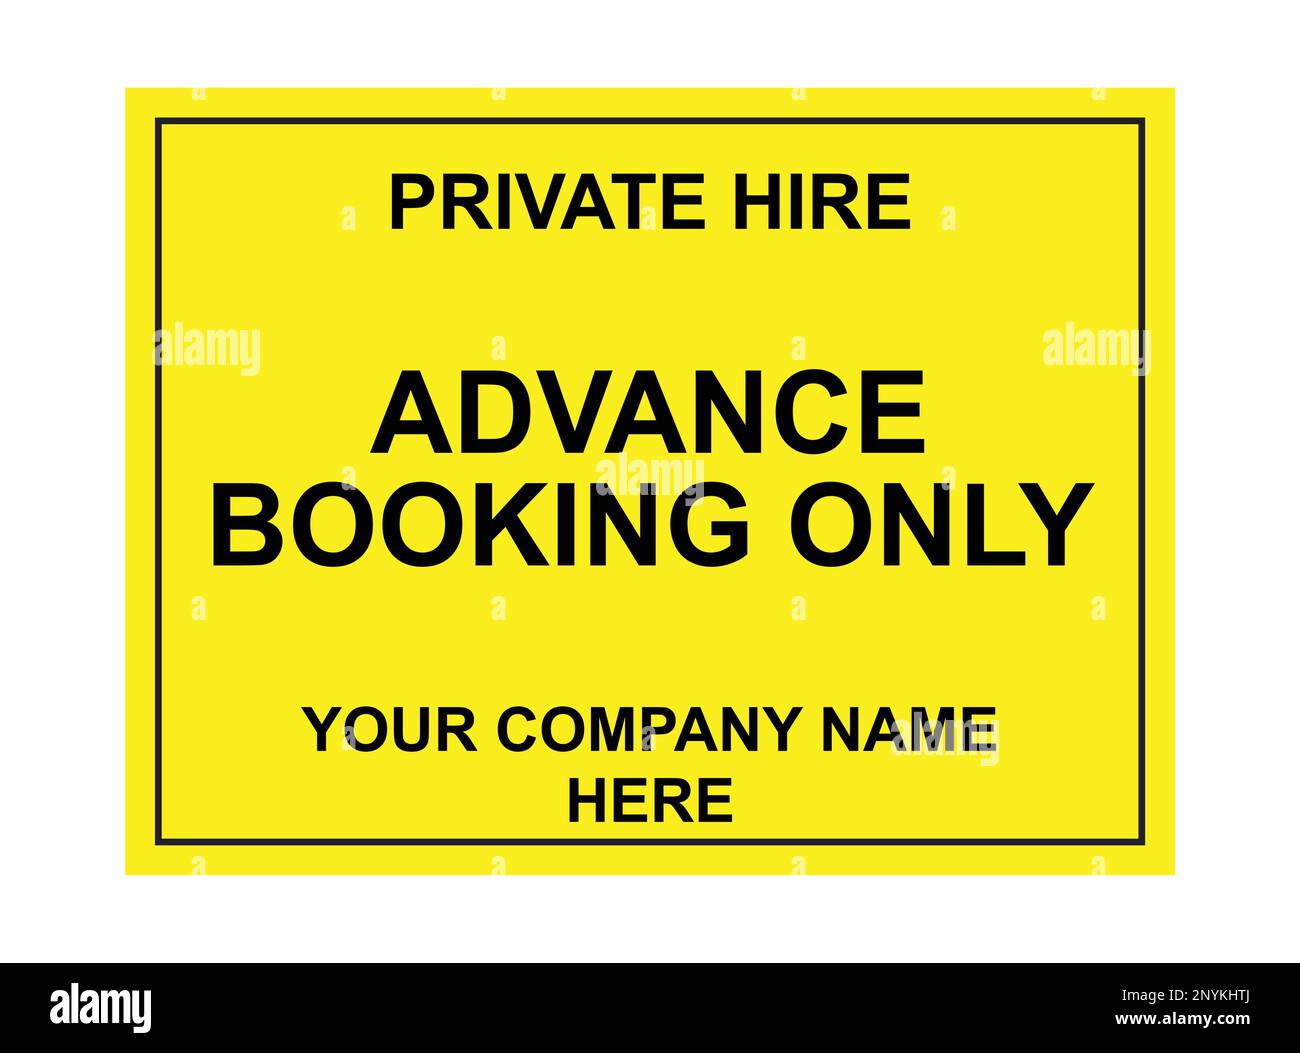 Taxi Sign - Advance Booking Only - Private Hire - Taxi door sign template in yellow and black Stock Vector